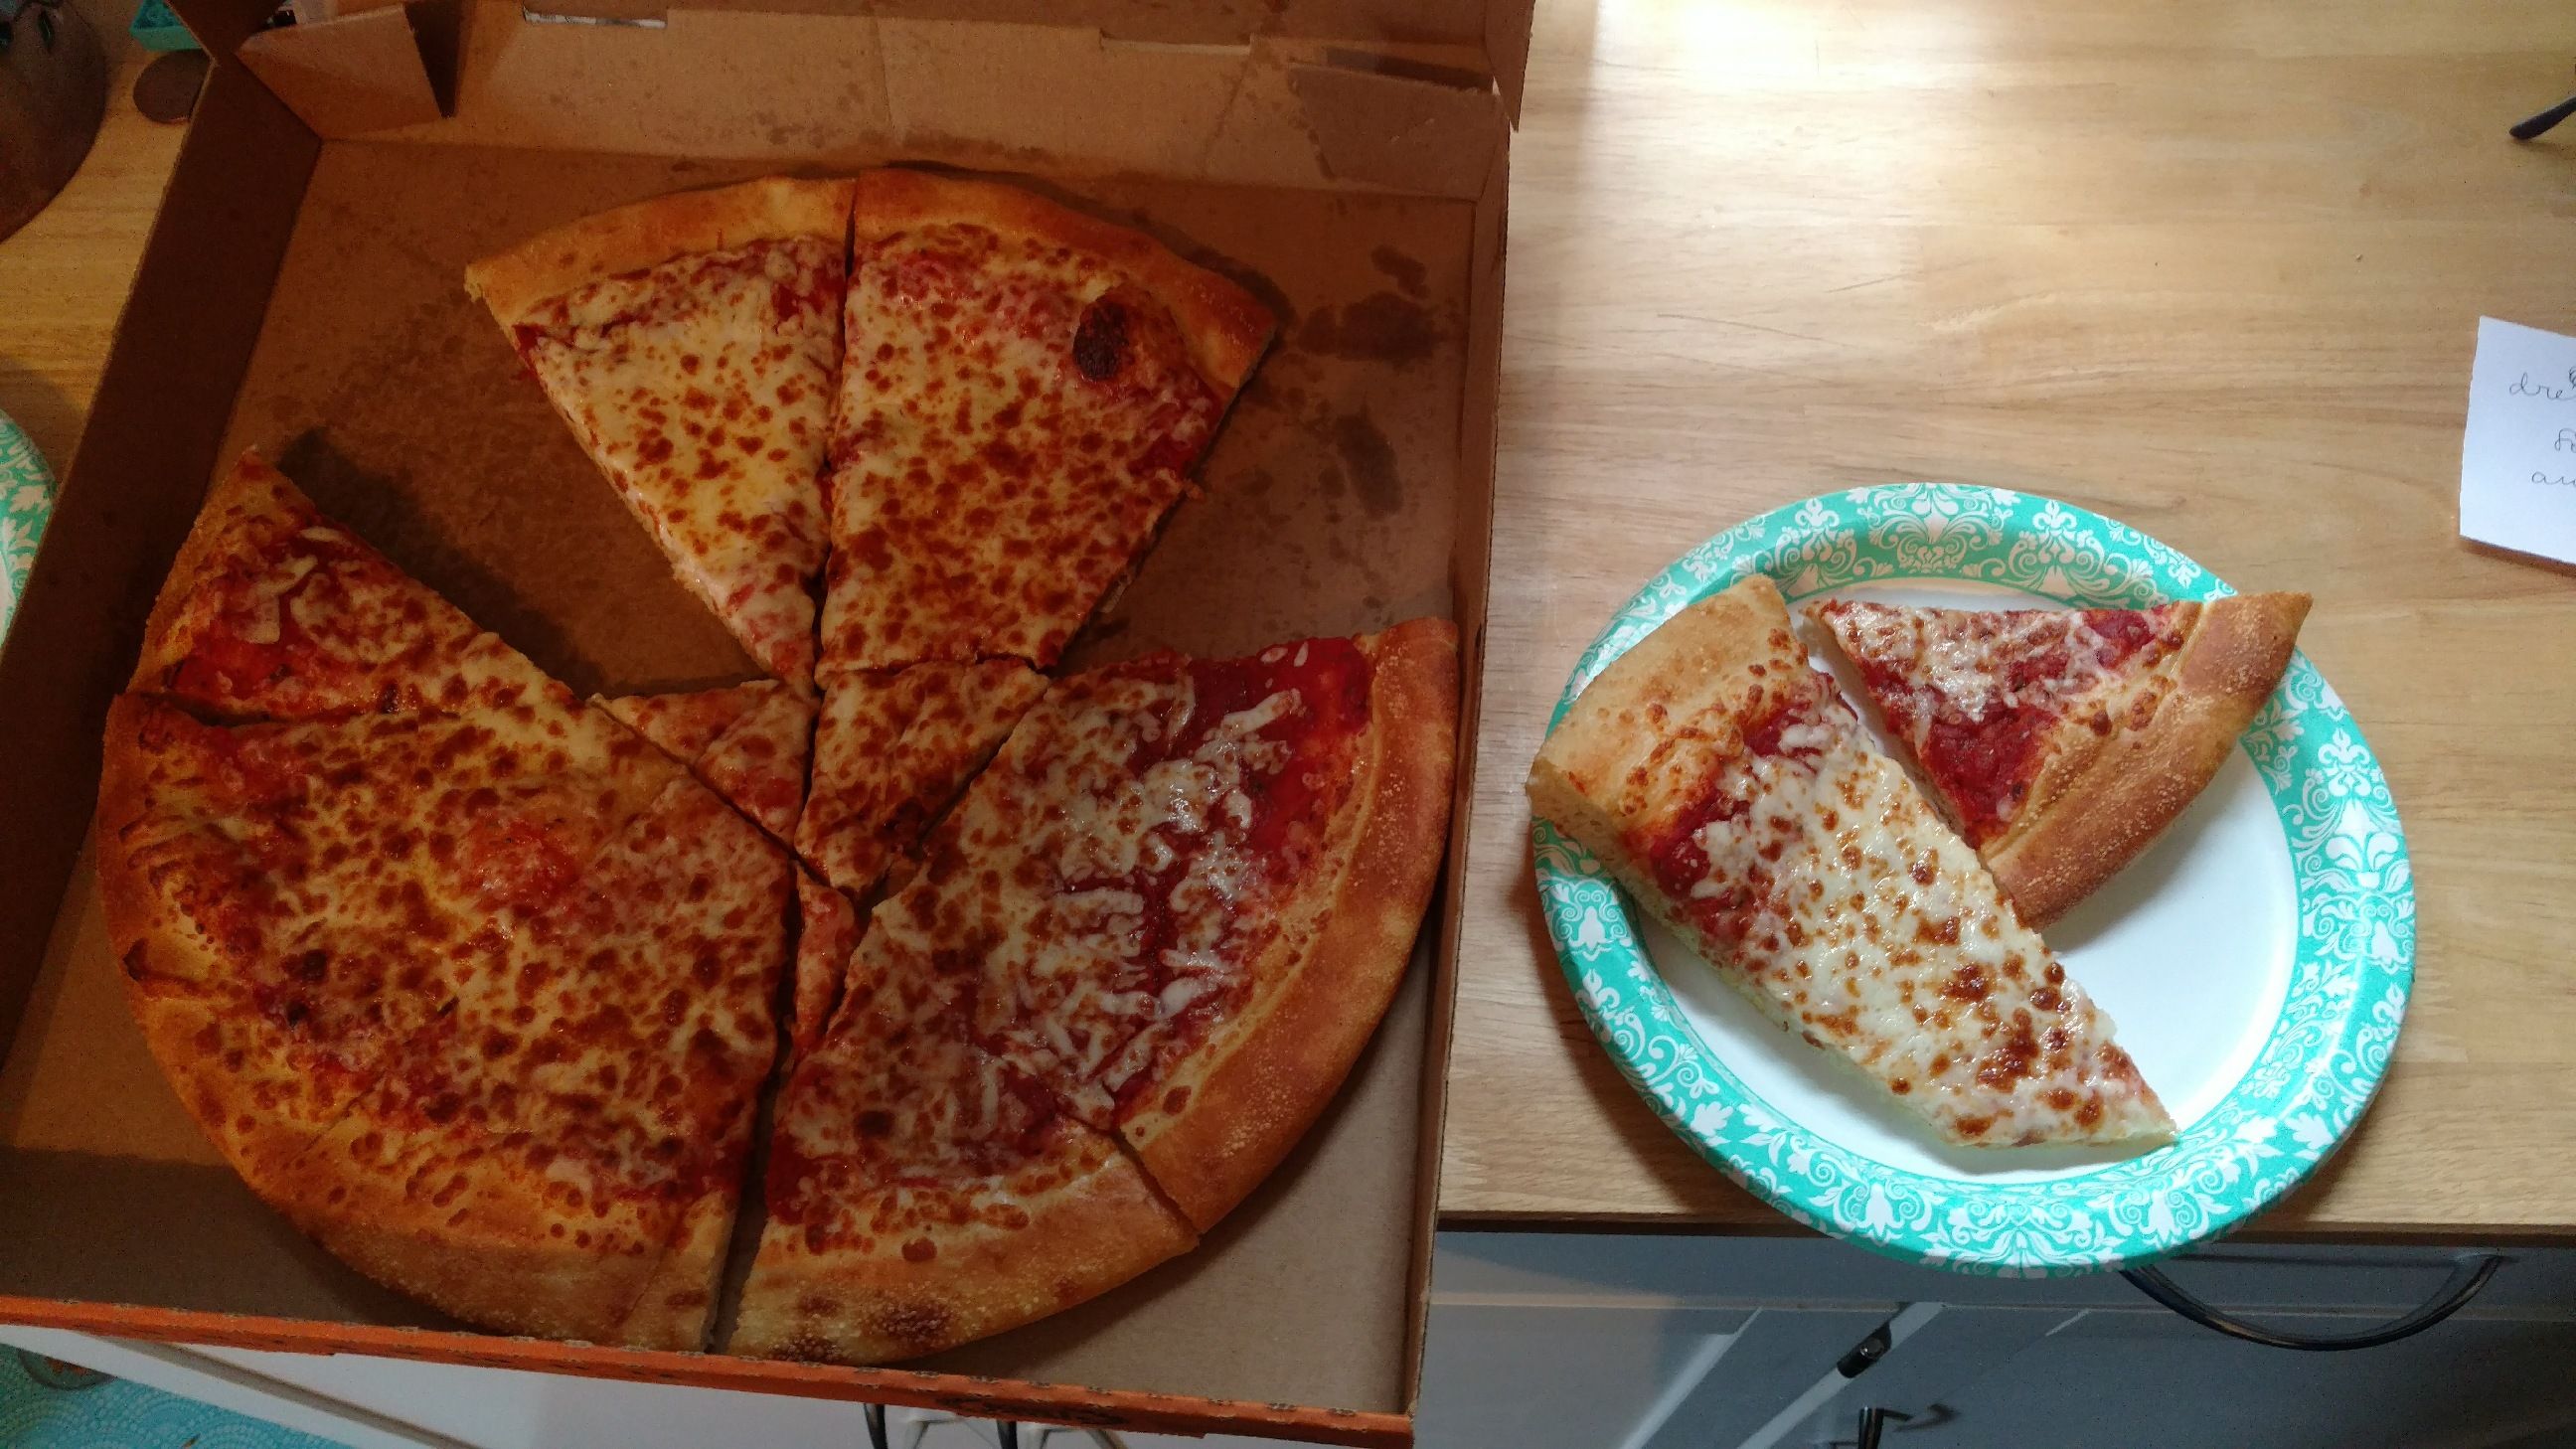 Can't tell if the slicer at Little Ceasar's is experimenting with some post modern styles, trying to summon a pizza demon, or just celebrating 4/20 a bit early.